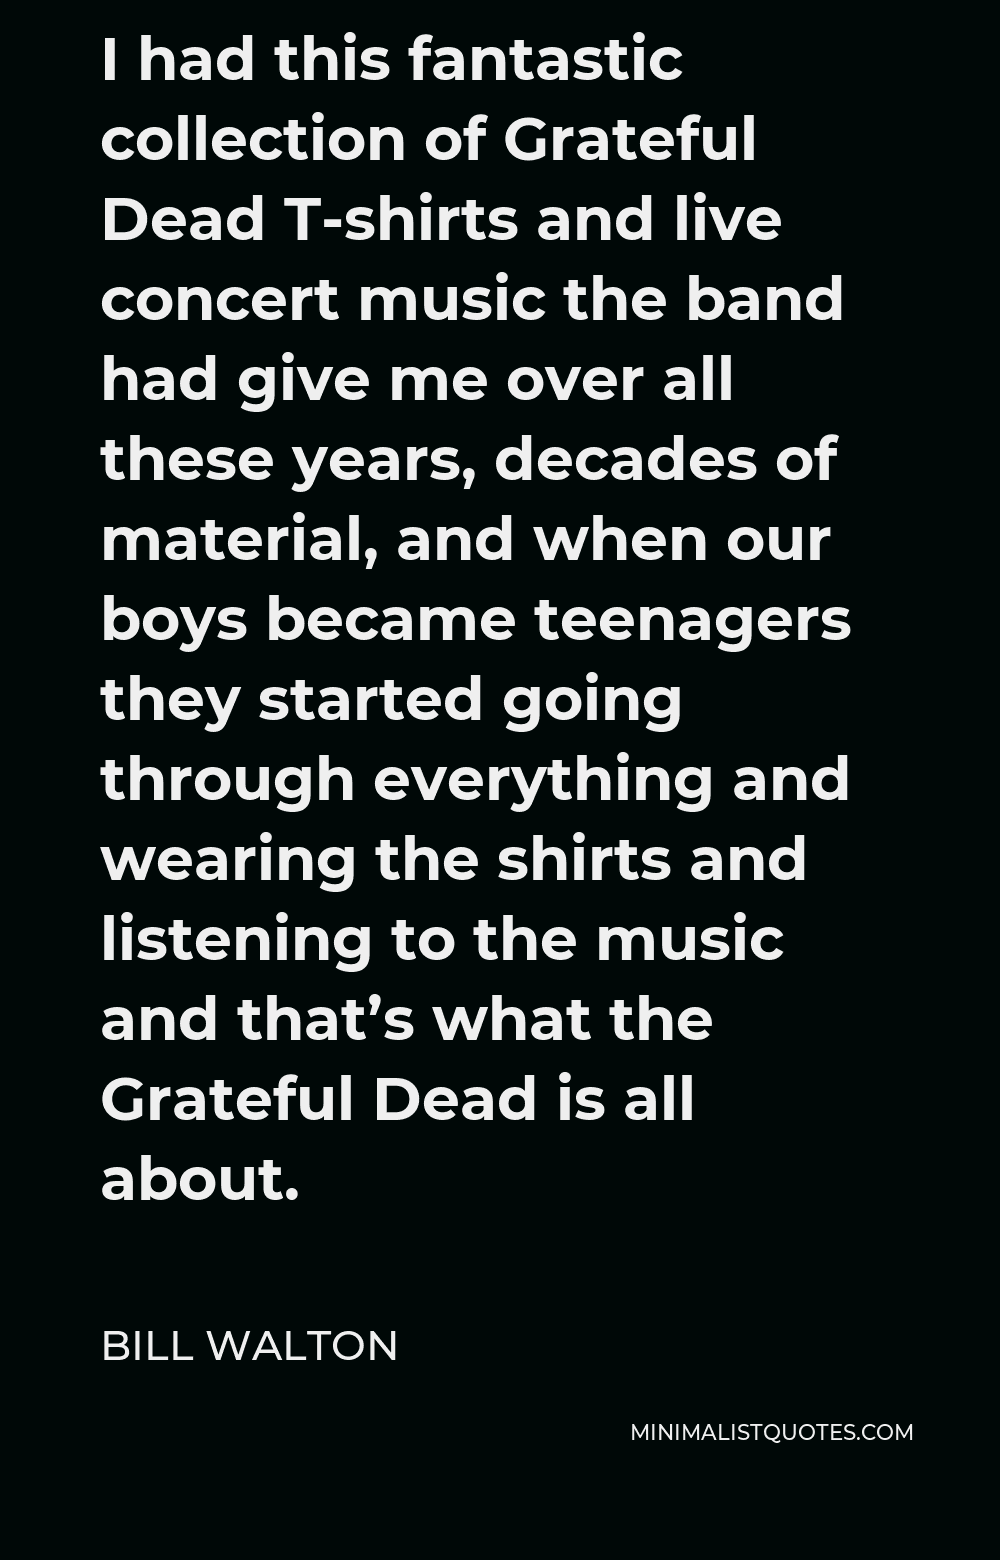 Bill Walton Quote - I had this fantastic collection of Grateful Dead T-shirts and live concert music the band had give me over all these years, decades of material, and when our boys became teenagers they started going through everything and wearing the shirts and listening to the music and that’s what the Grateful Dead is all about.